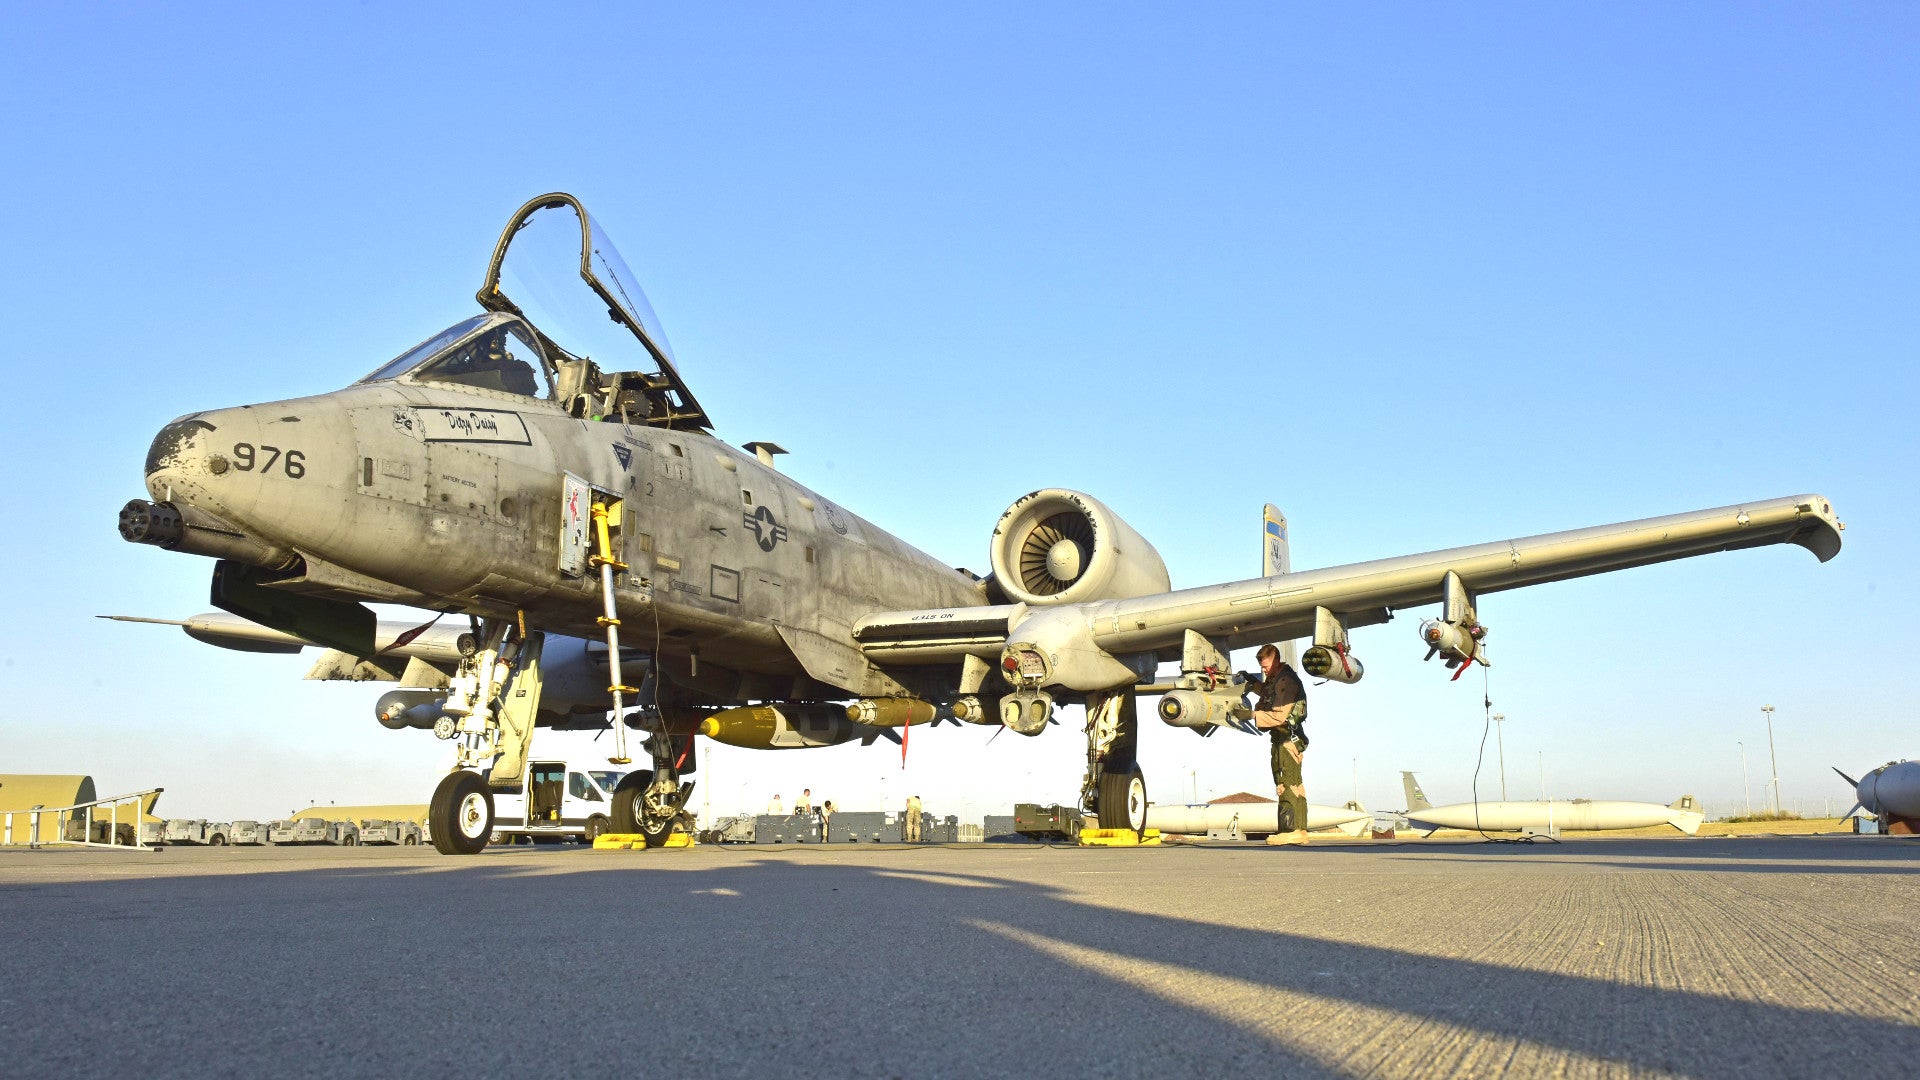 Top USAF Civilian Is a “Fan” of the A-10, but Dozens Will Still Likely Get Grounded